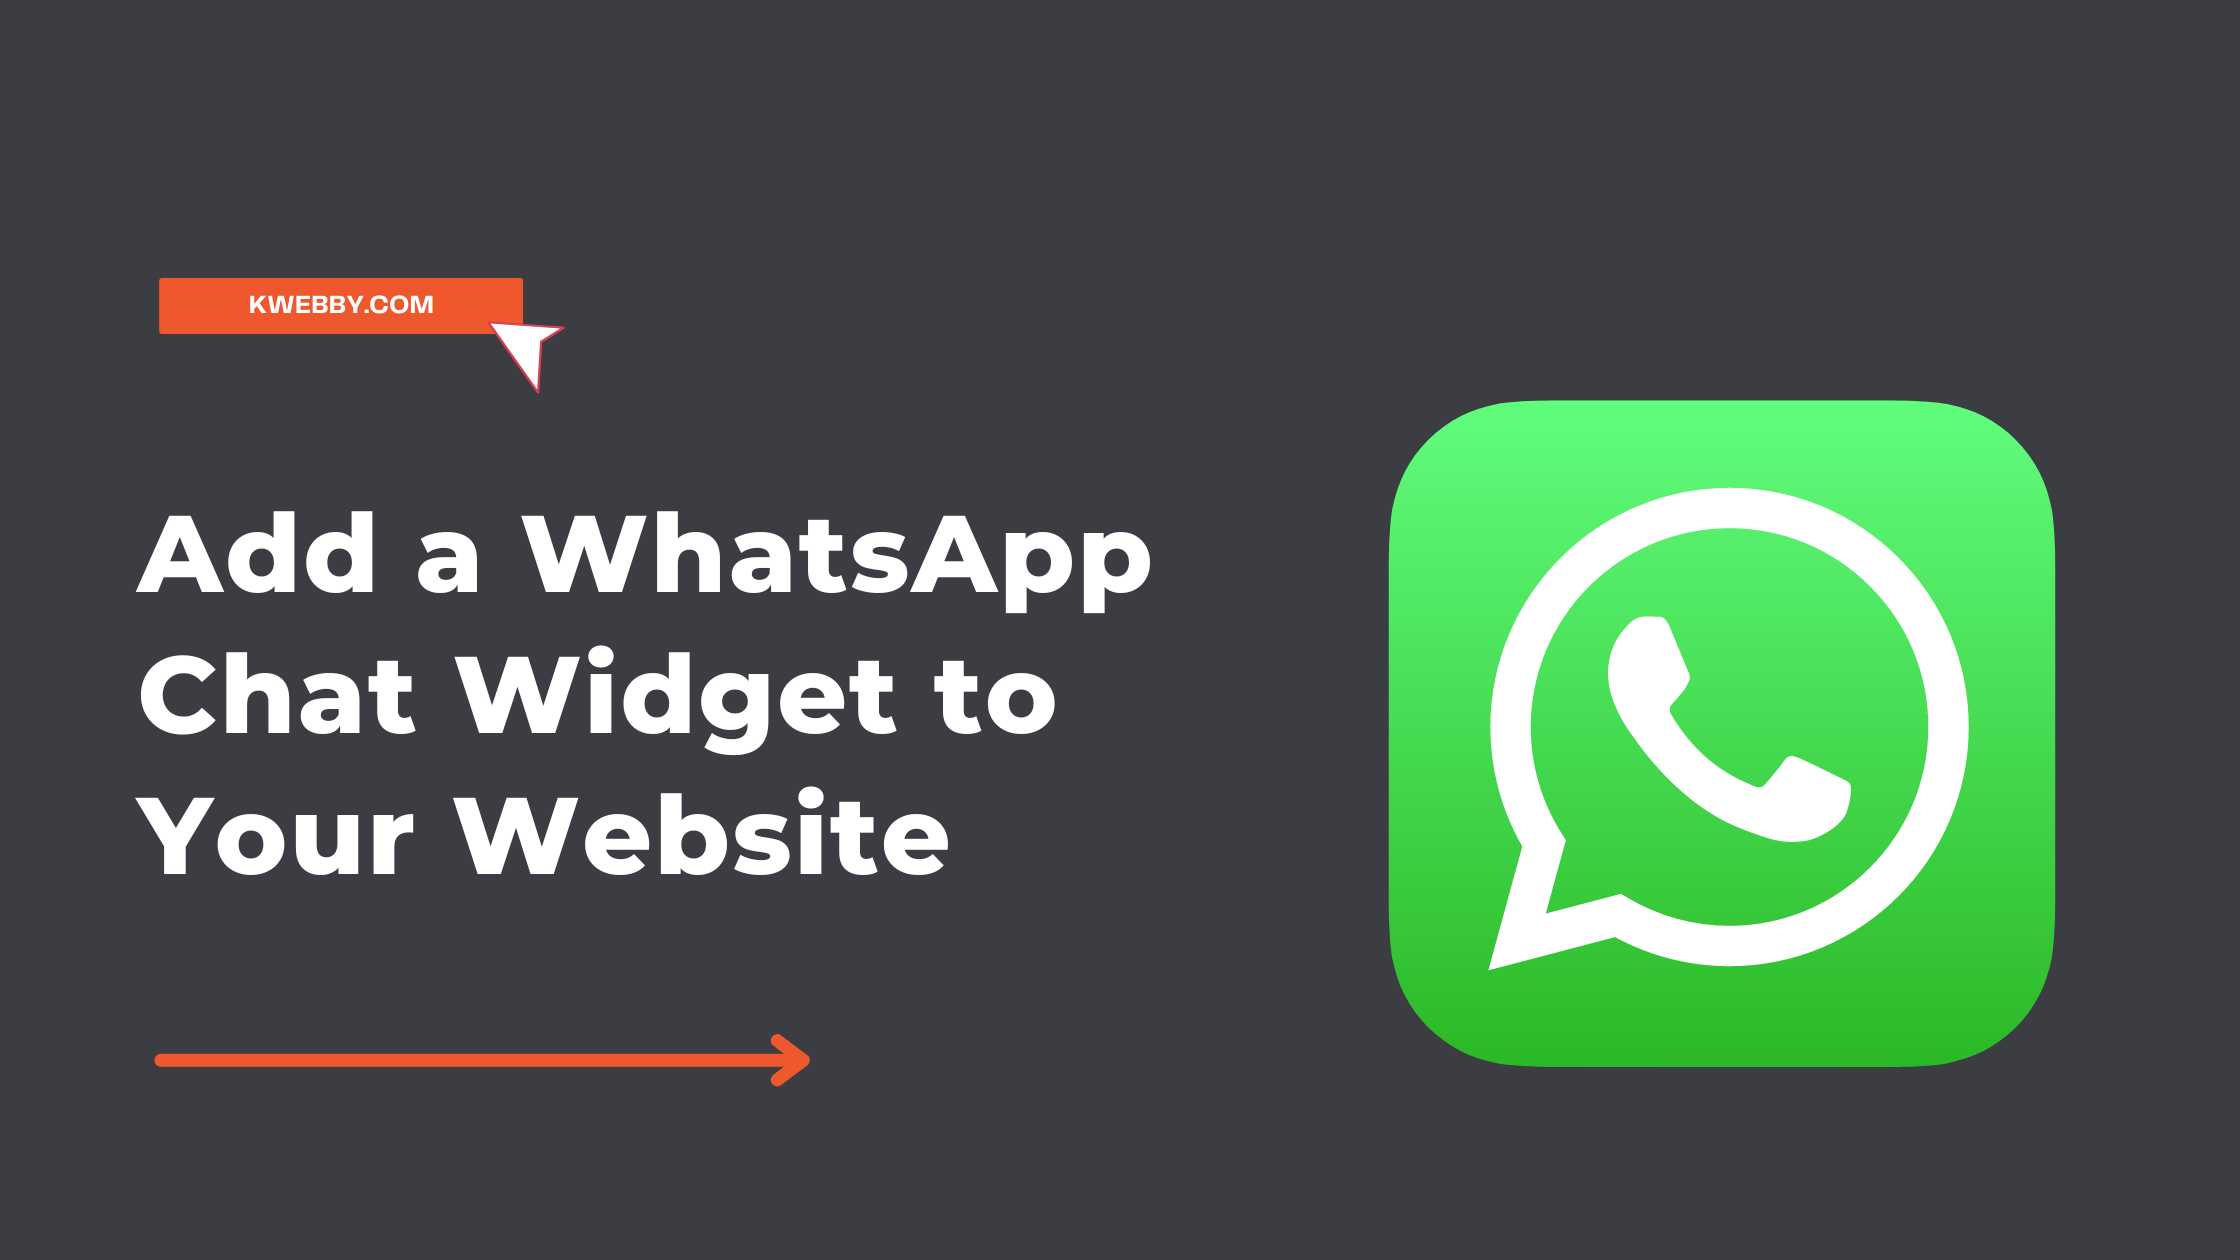 Add a WhatsApp Chat Widget to Your Website